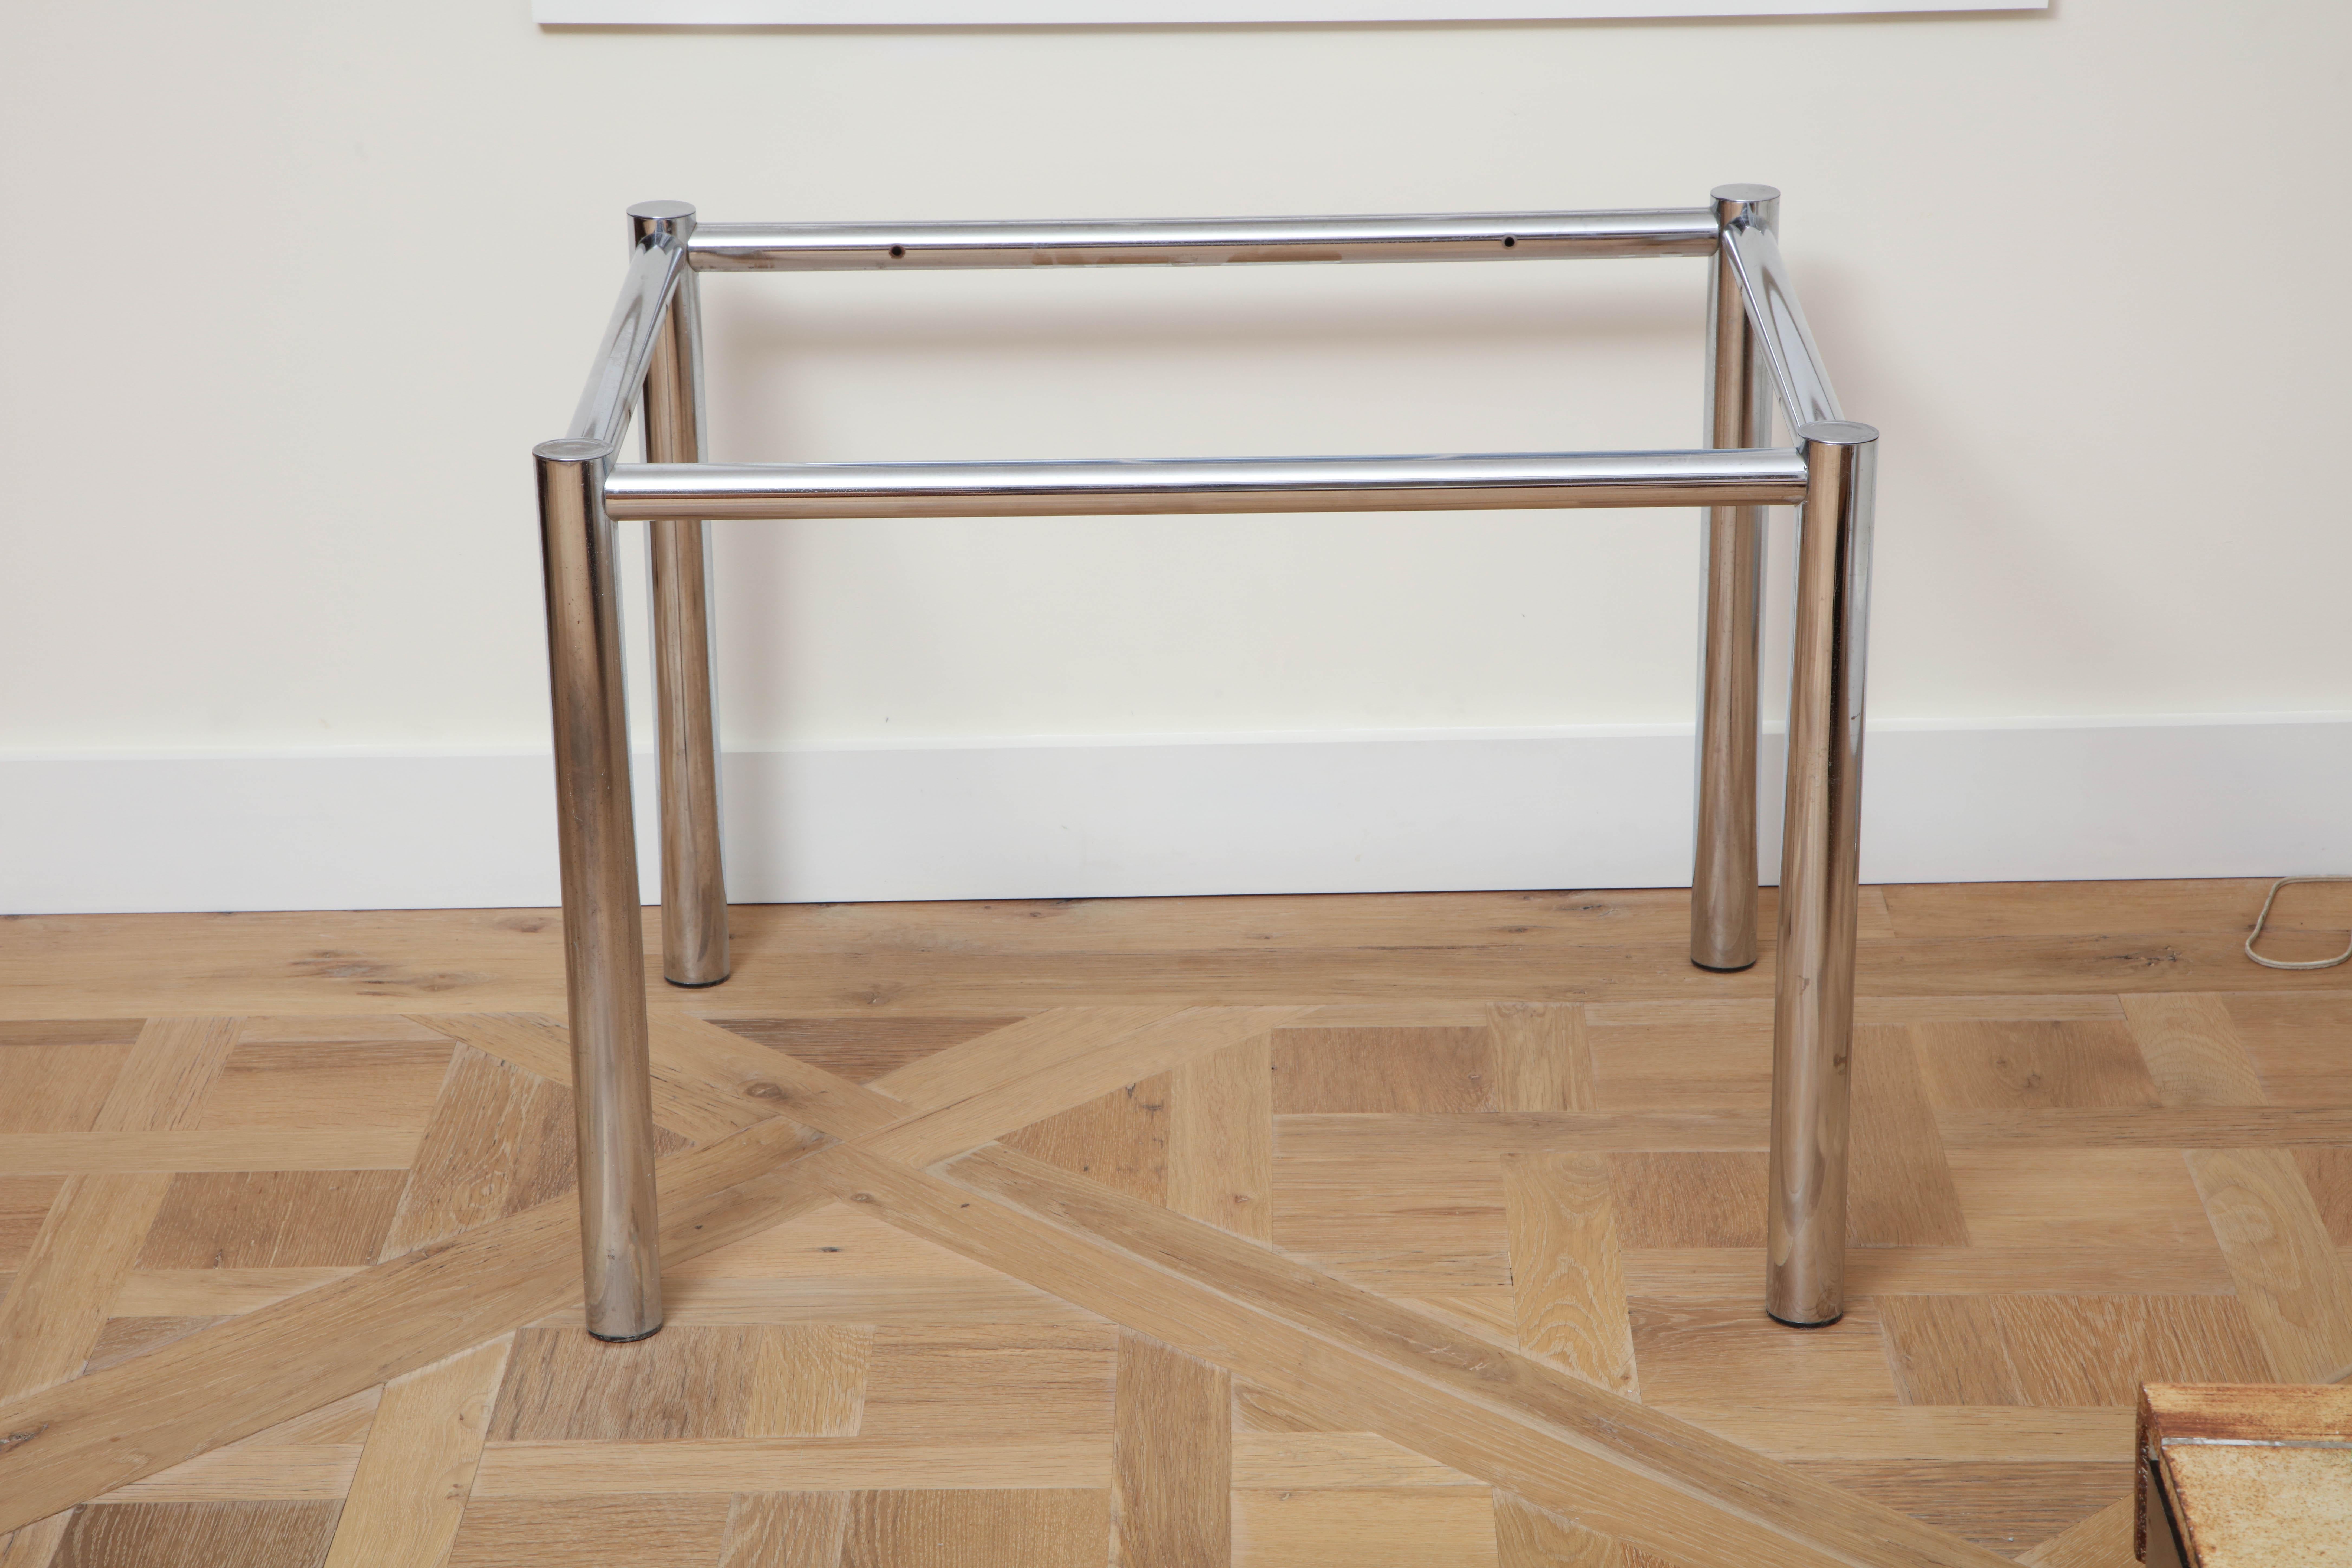 The rectangular (but nearly square) glass top inset into the chrome table frame; raised on round straight legs.